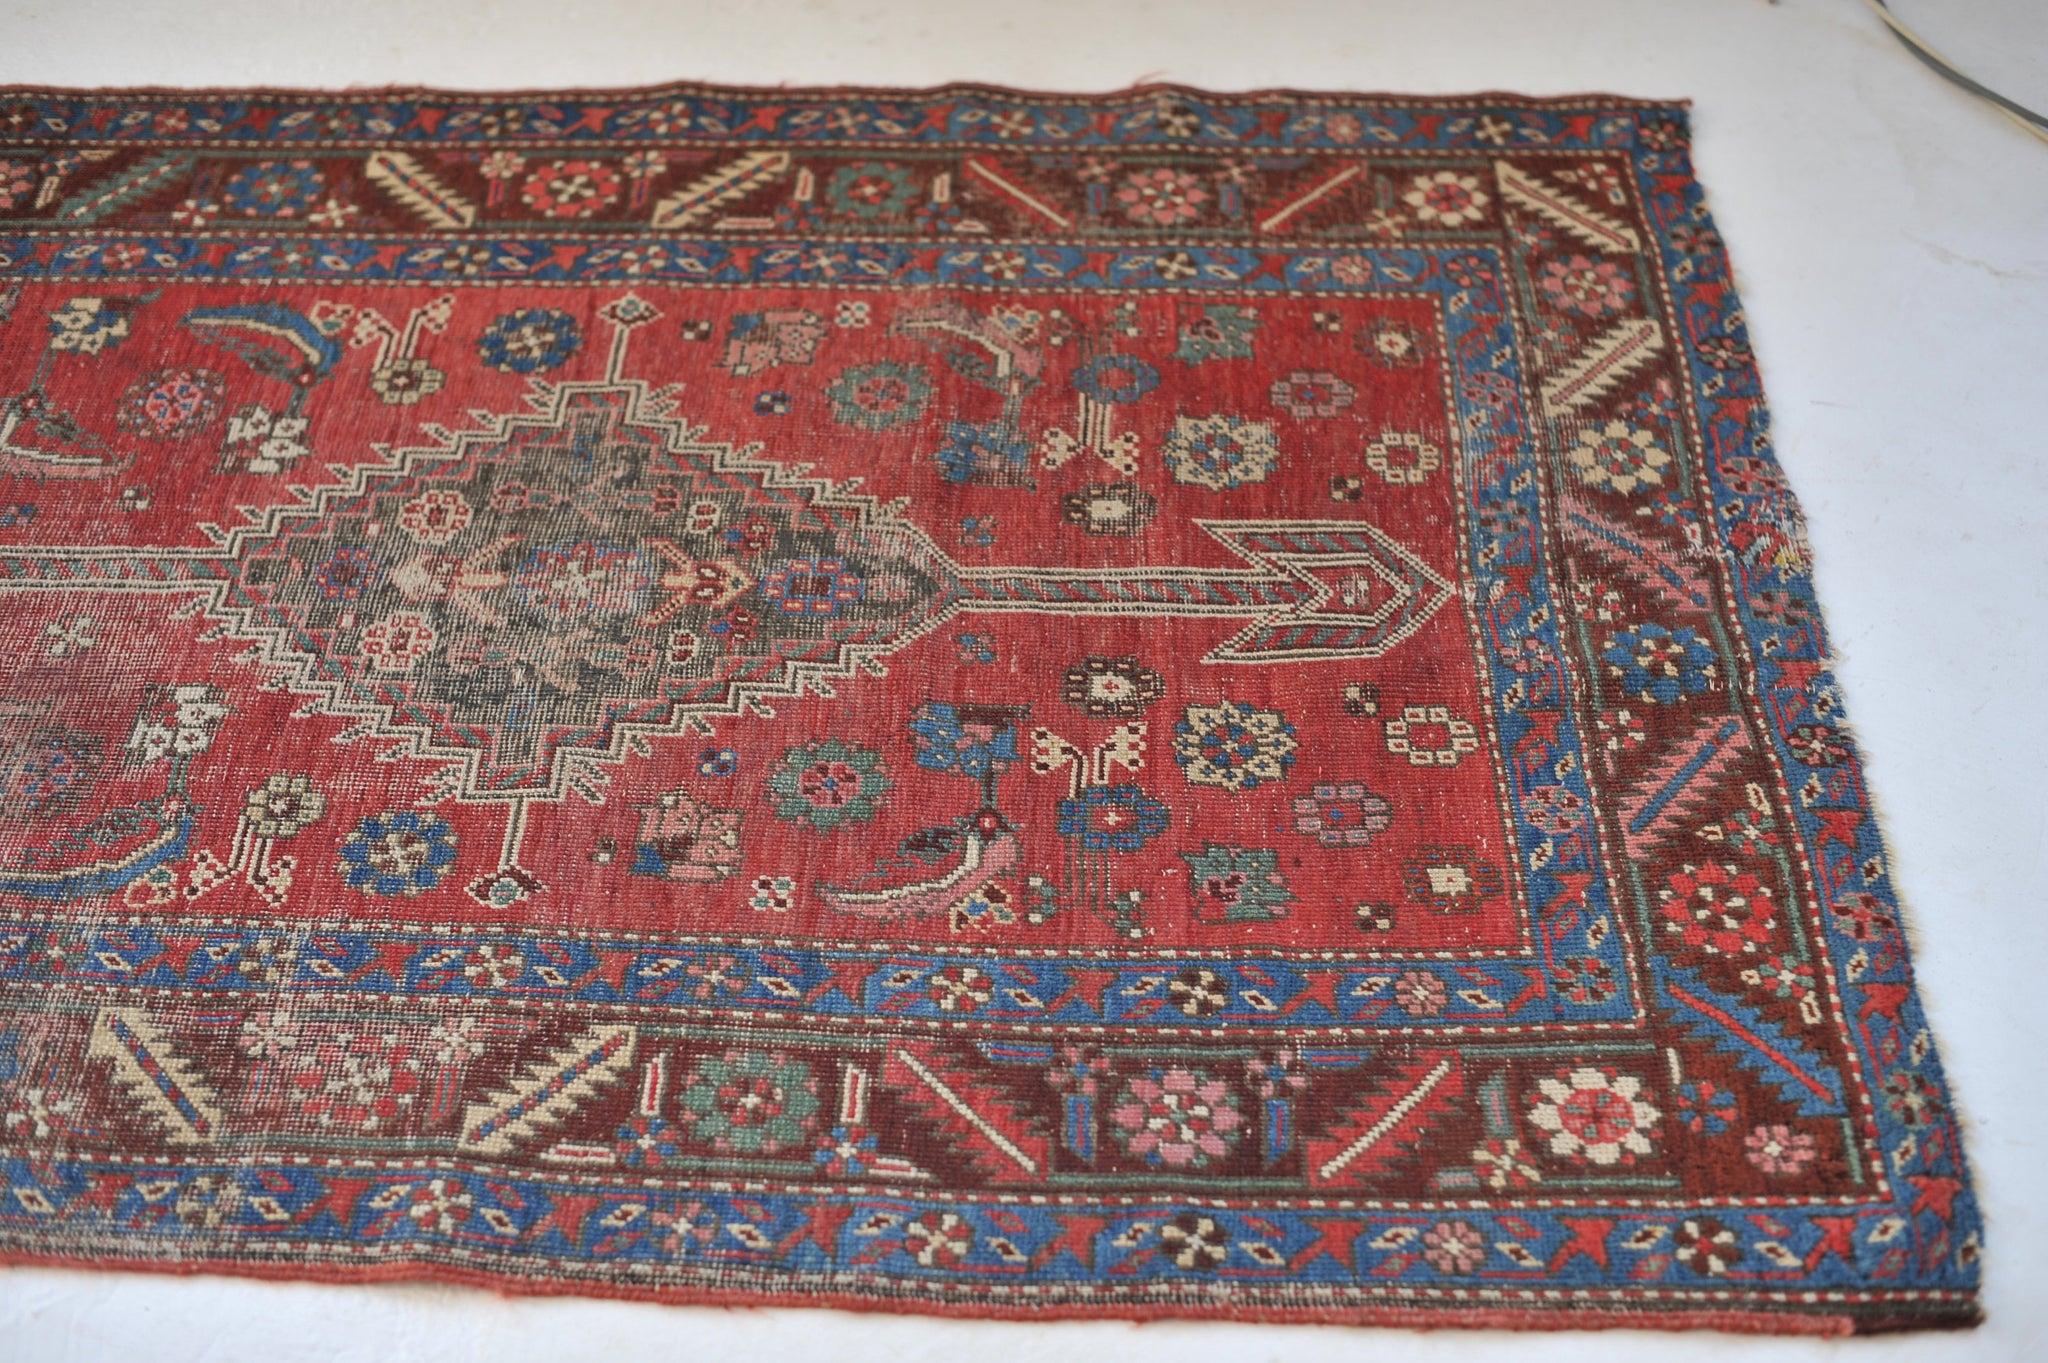 Roman Quad-Medallion Nomadic Tribal Antique Runner

About: Incredibly old and infinitely nomadic antique runner from the mountains that are known for such masterpieces! You can't ignore the rich and attractive red and the hundreds of variations of